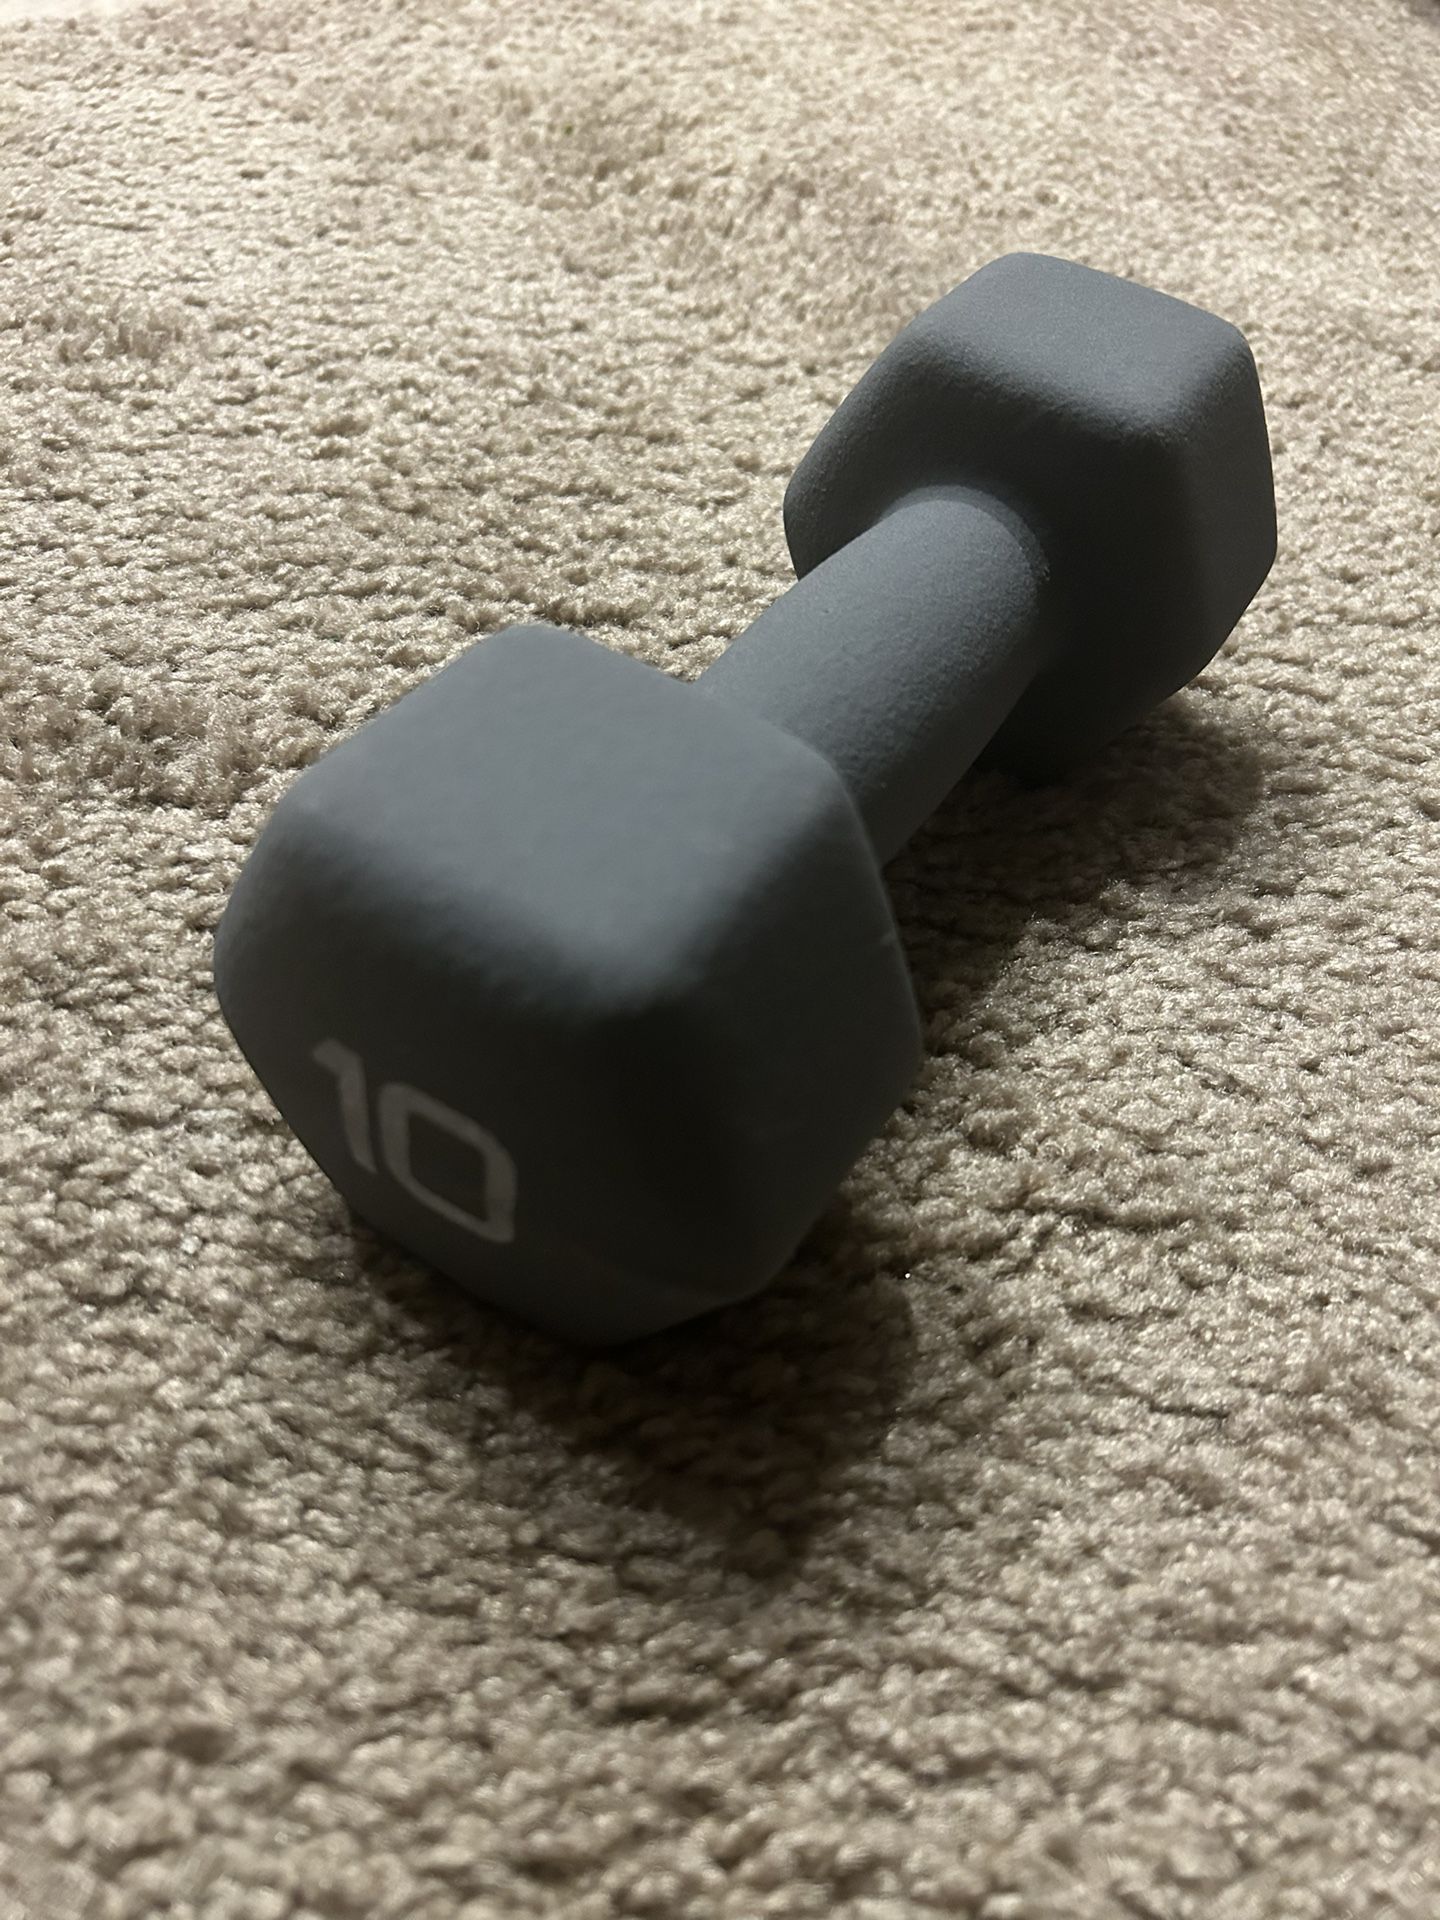 10 Pound Dumbbell Weight